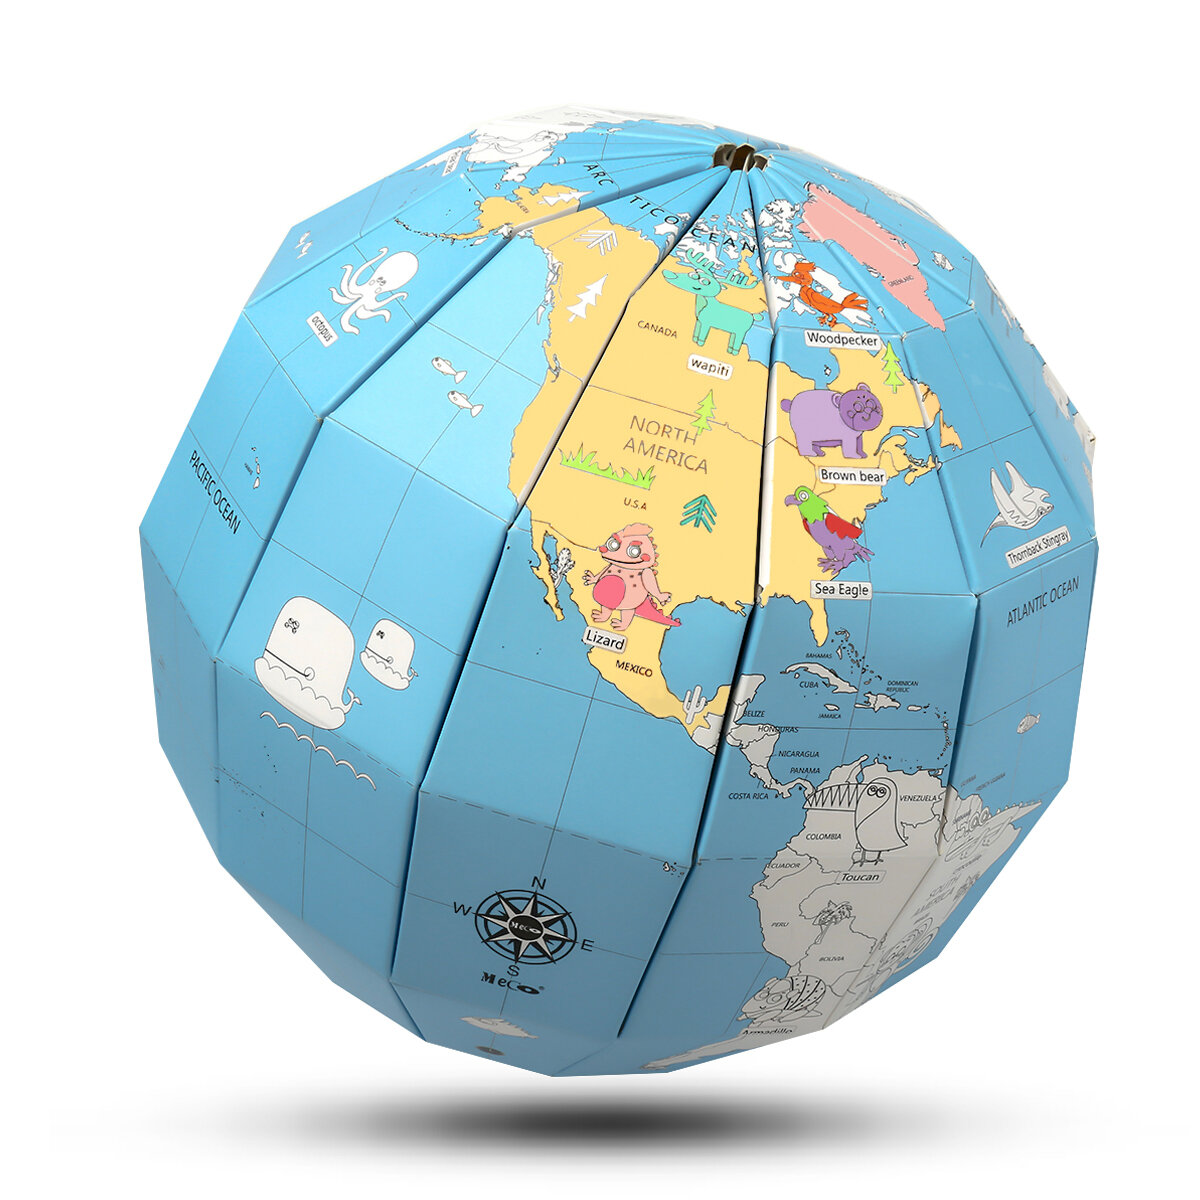 

Educational Globe - DIY Paper Globe World Globe The Structure of The Earth Gifts for Kids Students Birthday Gifts Gadget